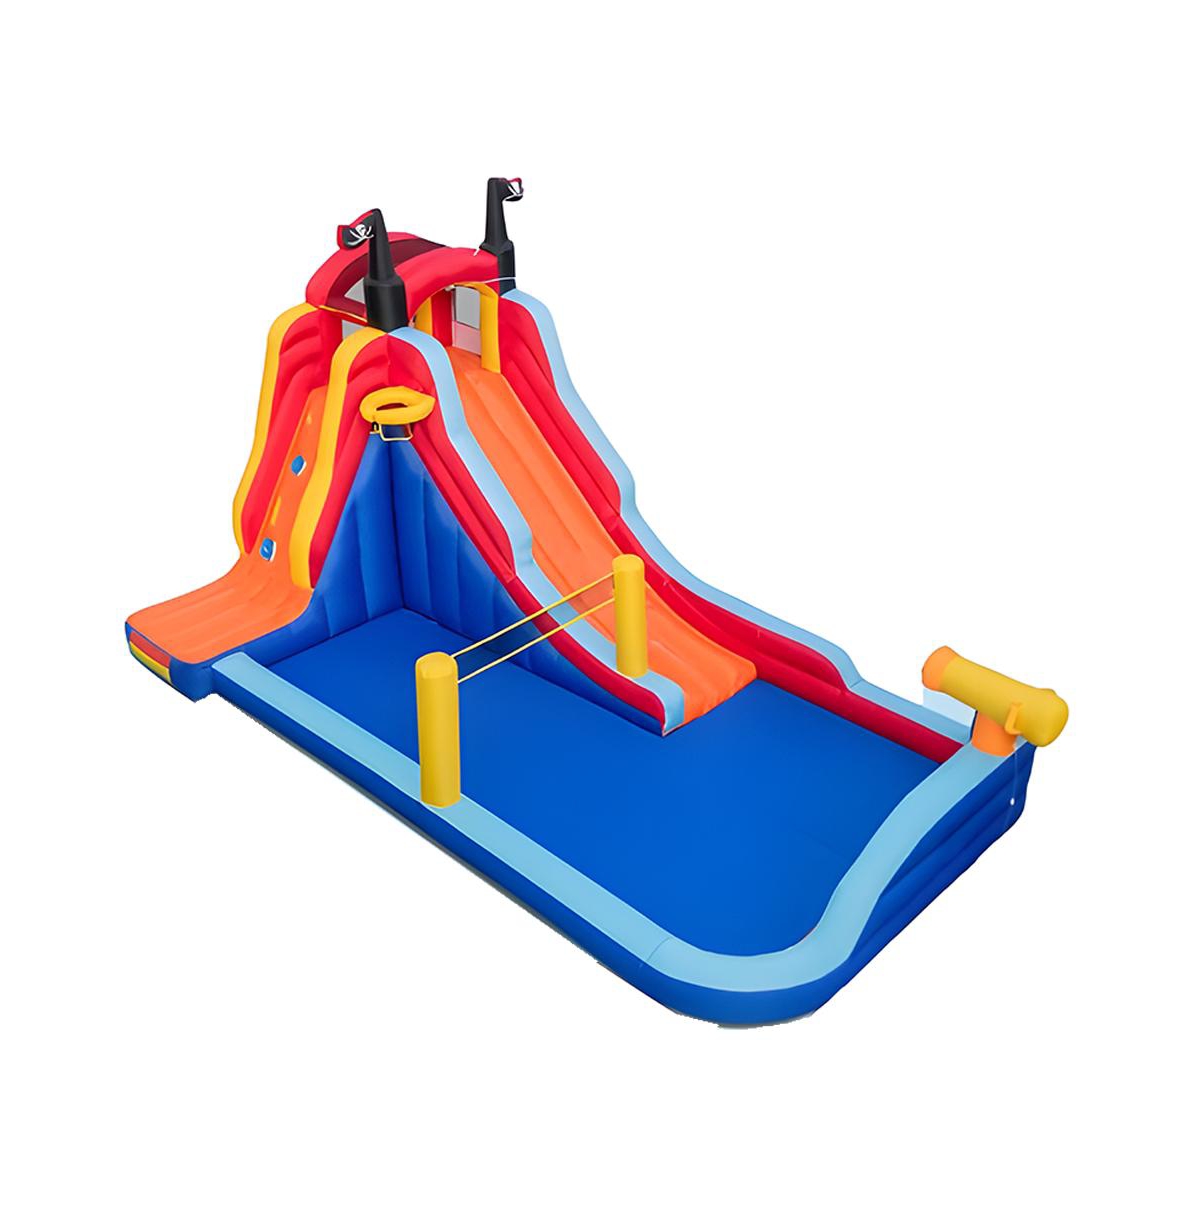 5-in-1 Inflatable Bounce House with 2 Water Slides and Large Splash Pool Without Blower - Multi Color